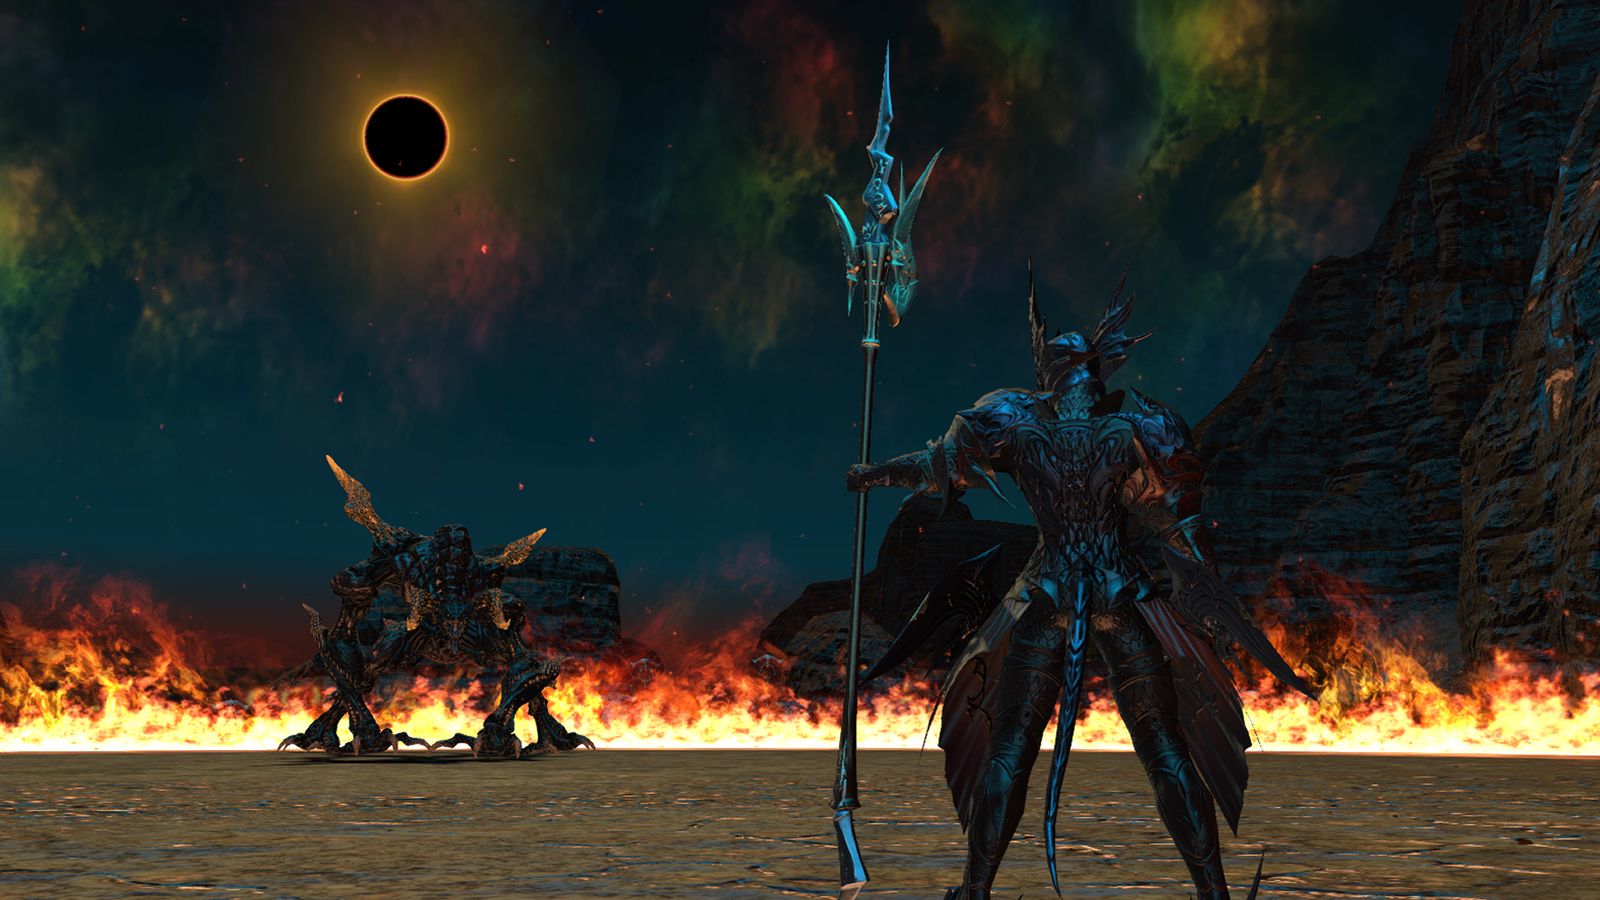 An image of a Dragoon from Final Fantasy XIV embarking on the final step of his Anima Lux Relic Weapon from Heavensward, confronting the firey primal Ifrit.